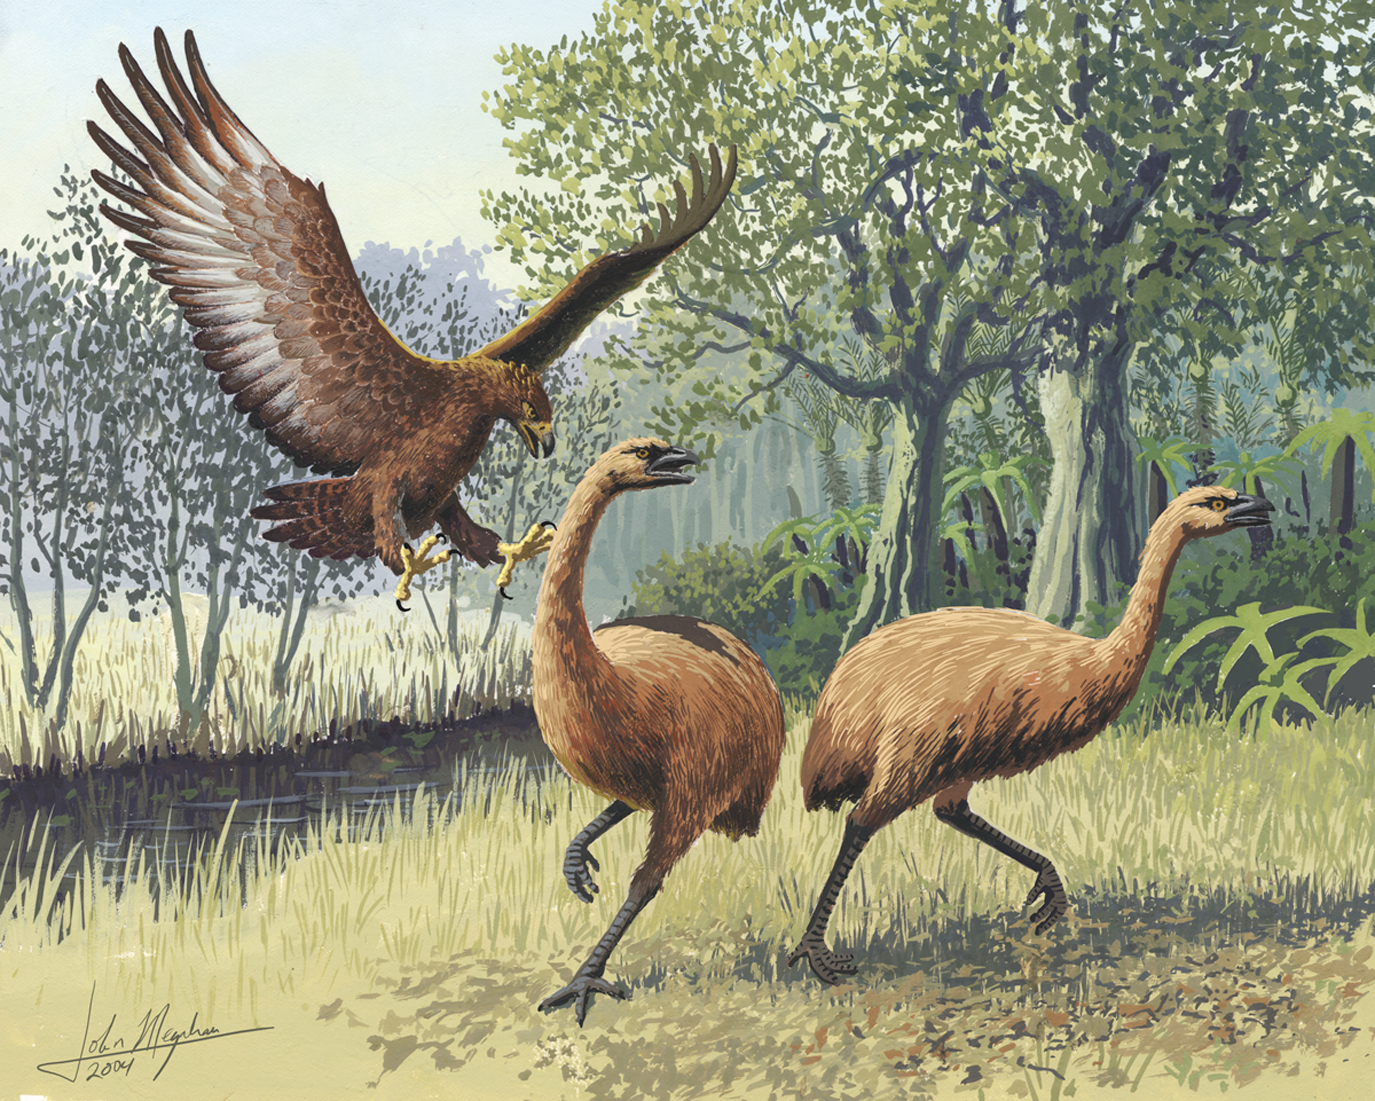 Little Bush Moa under attack by a Haast's Eagle. Illustration by John Megahan, CC BY 2.5